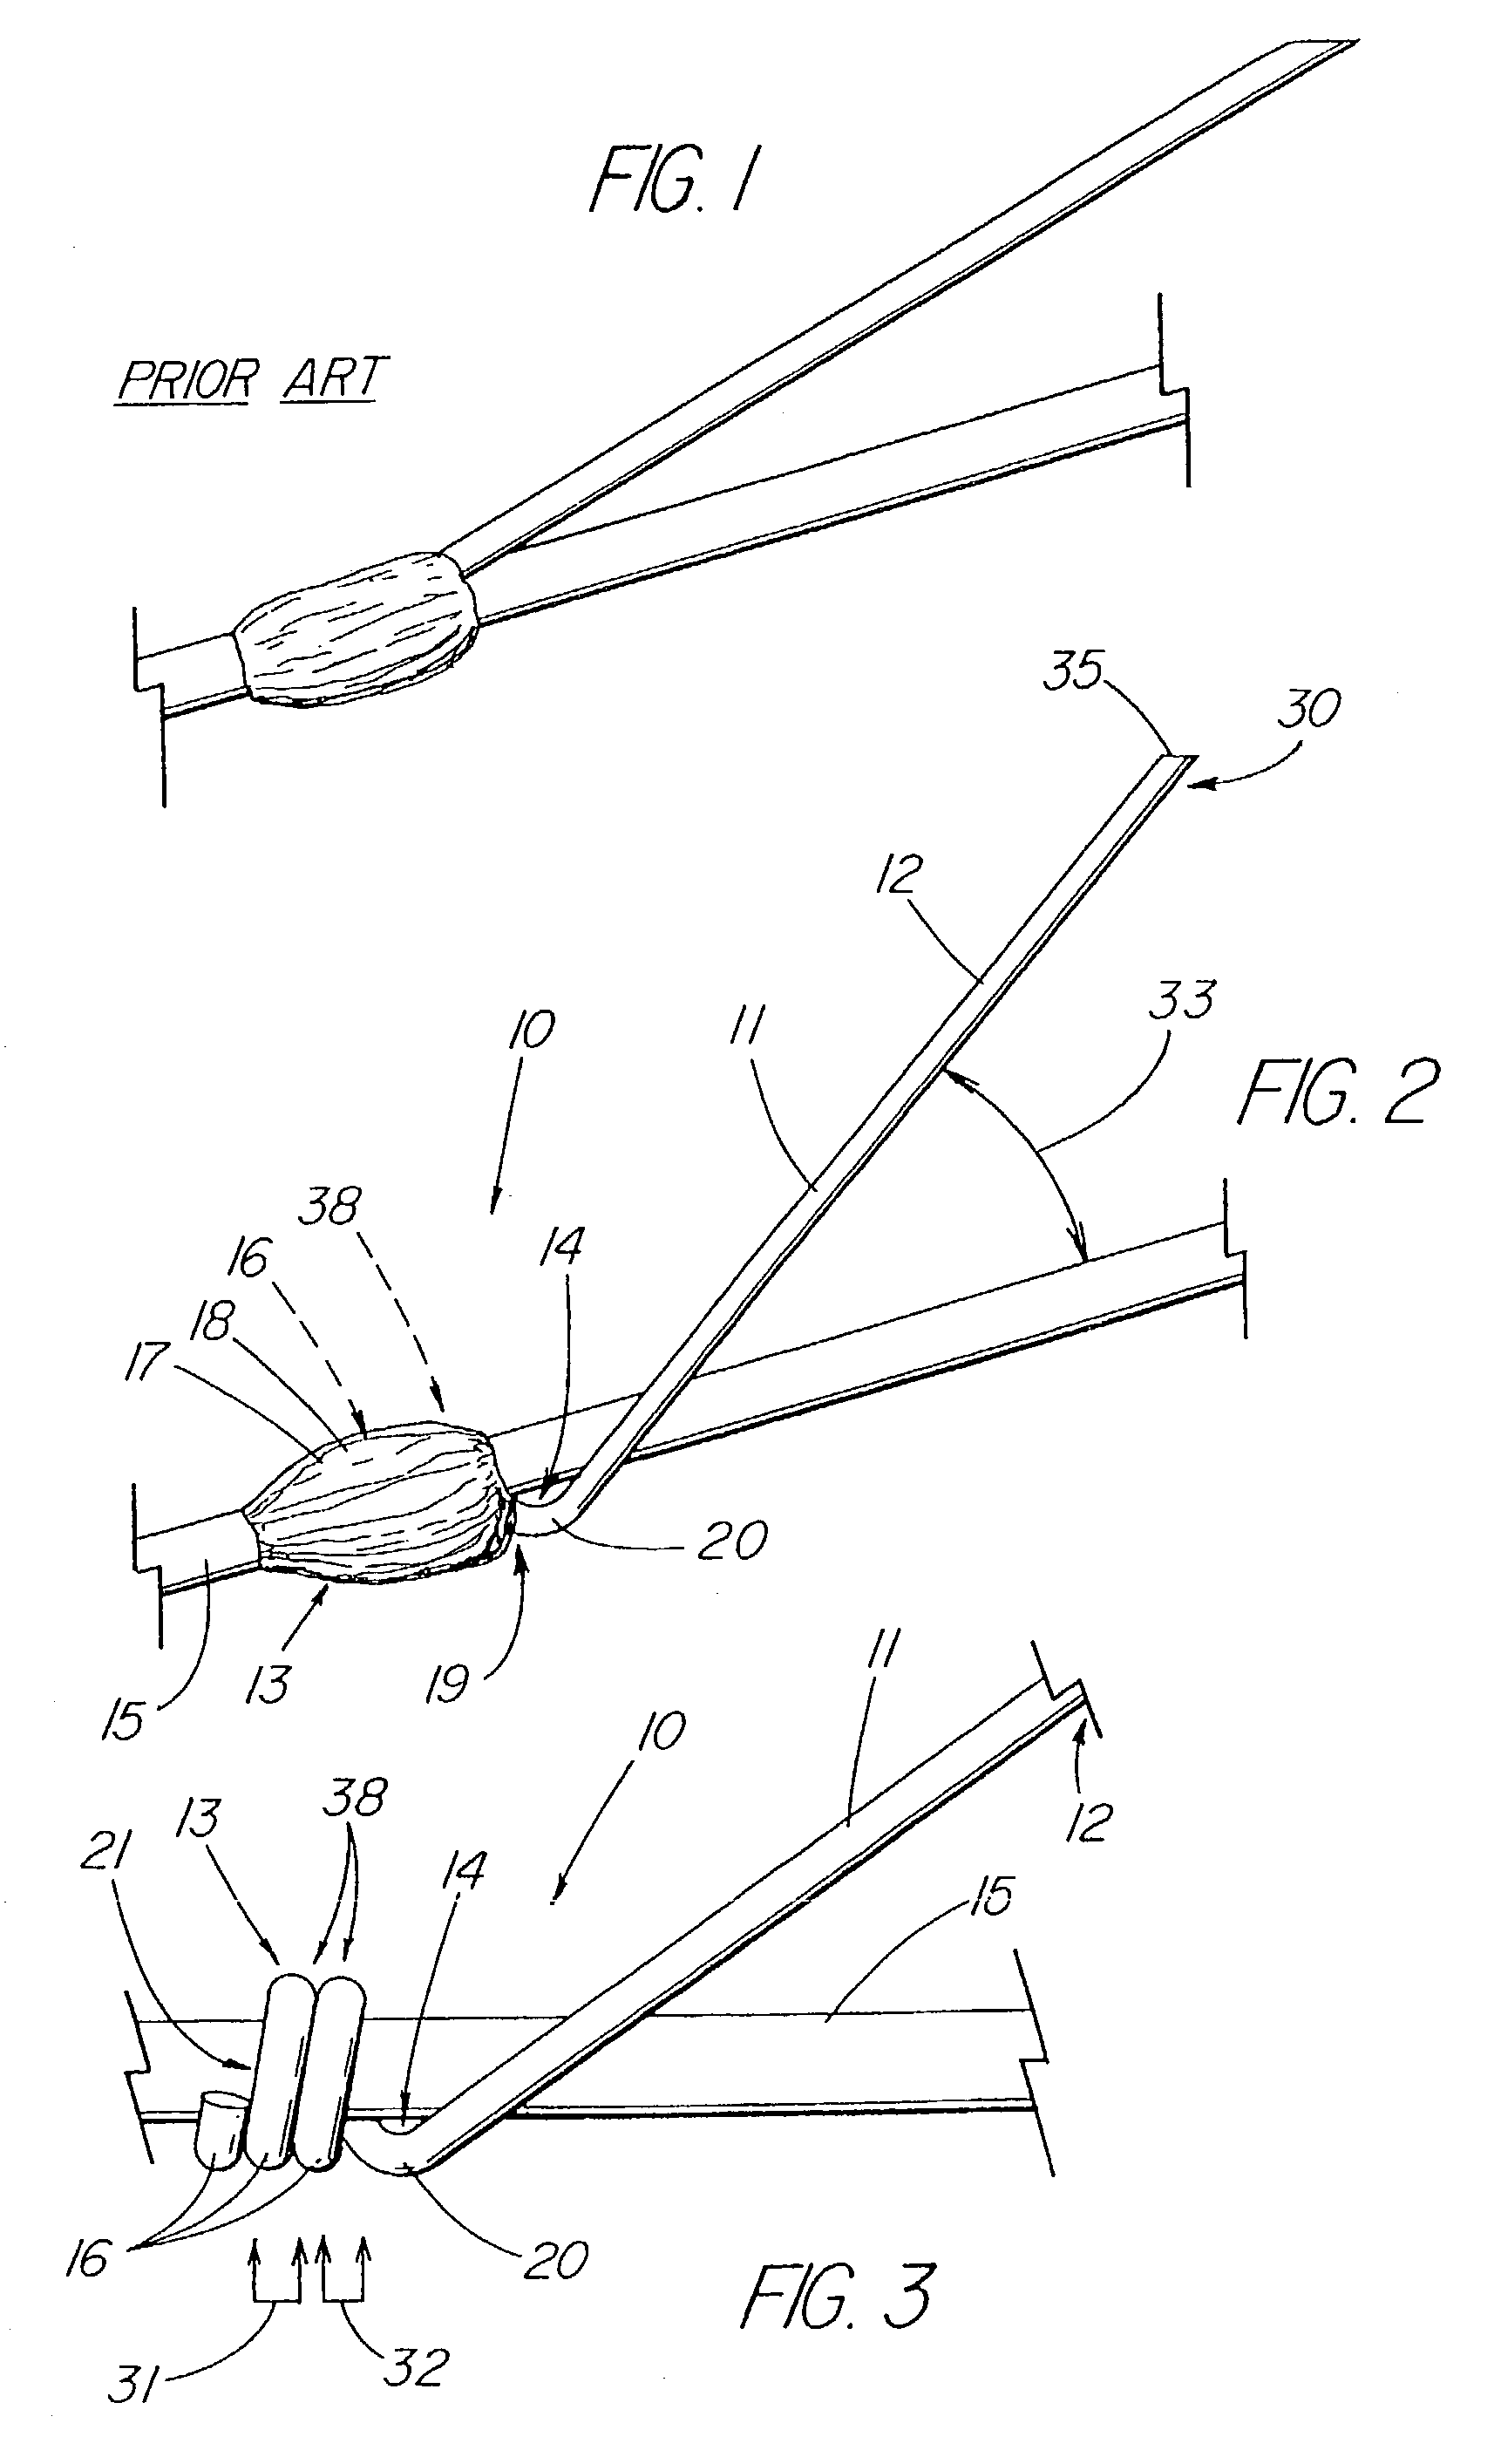 Flexible barb for anchoring a prosthesis